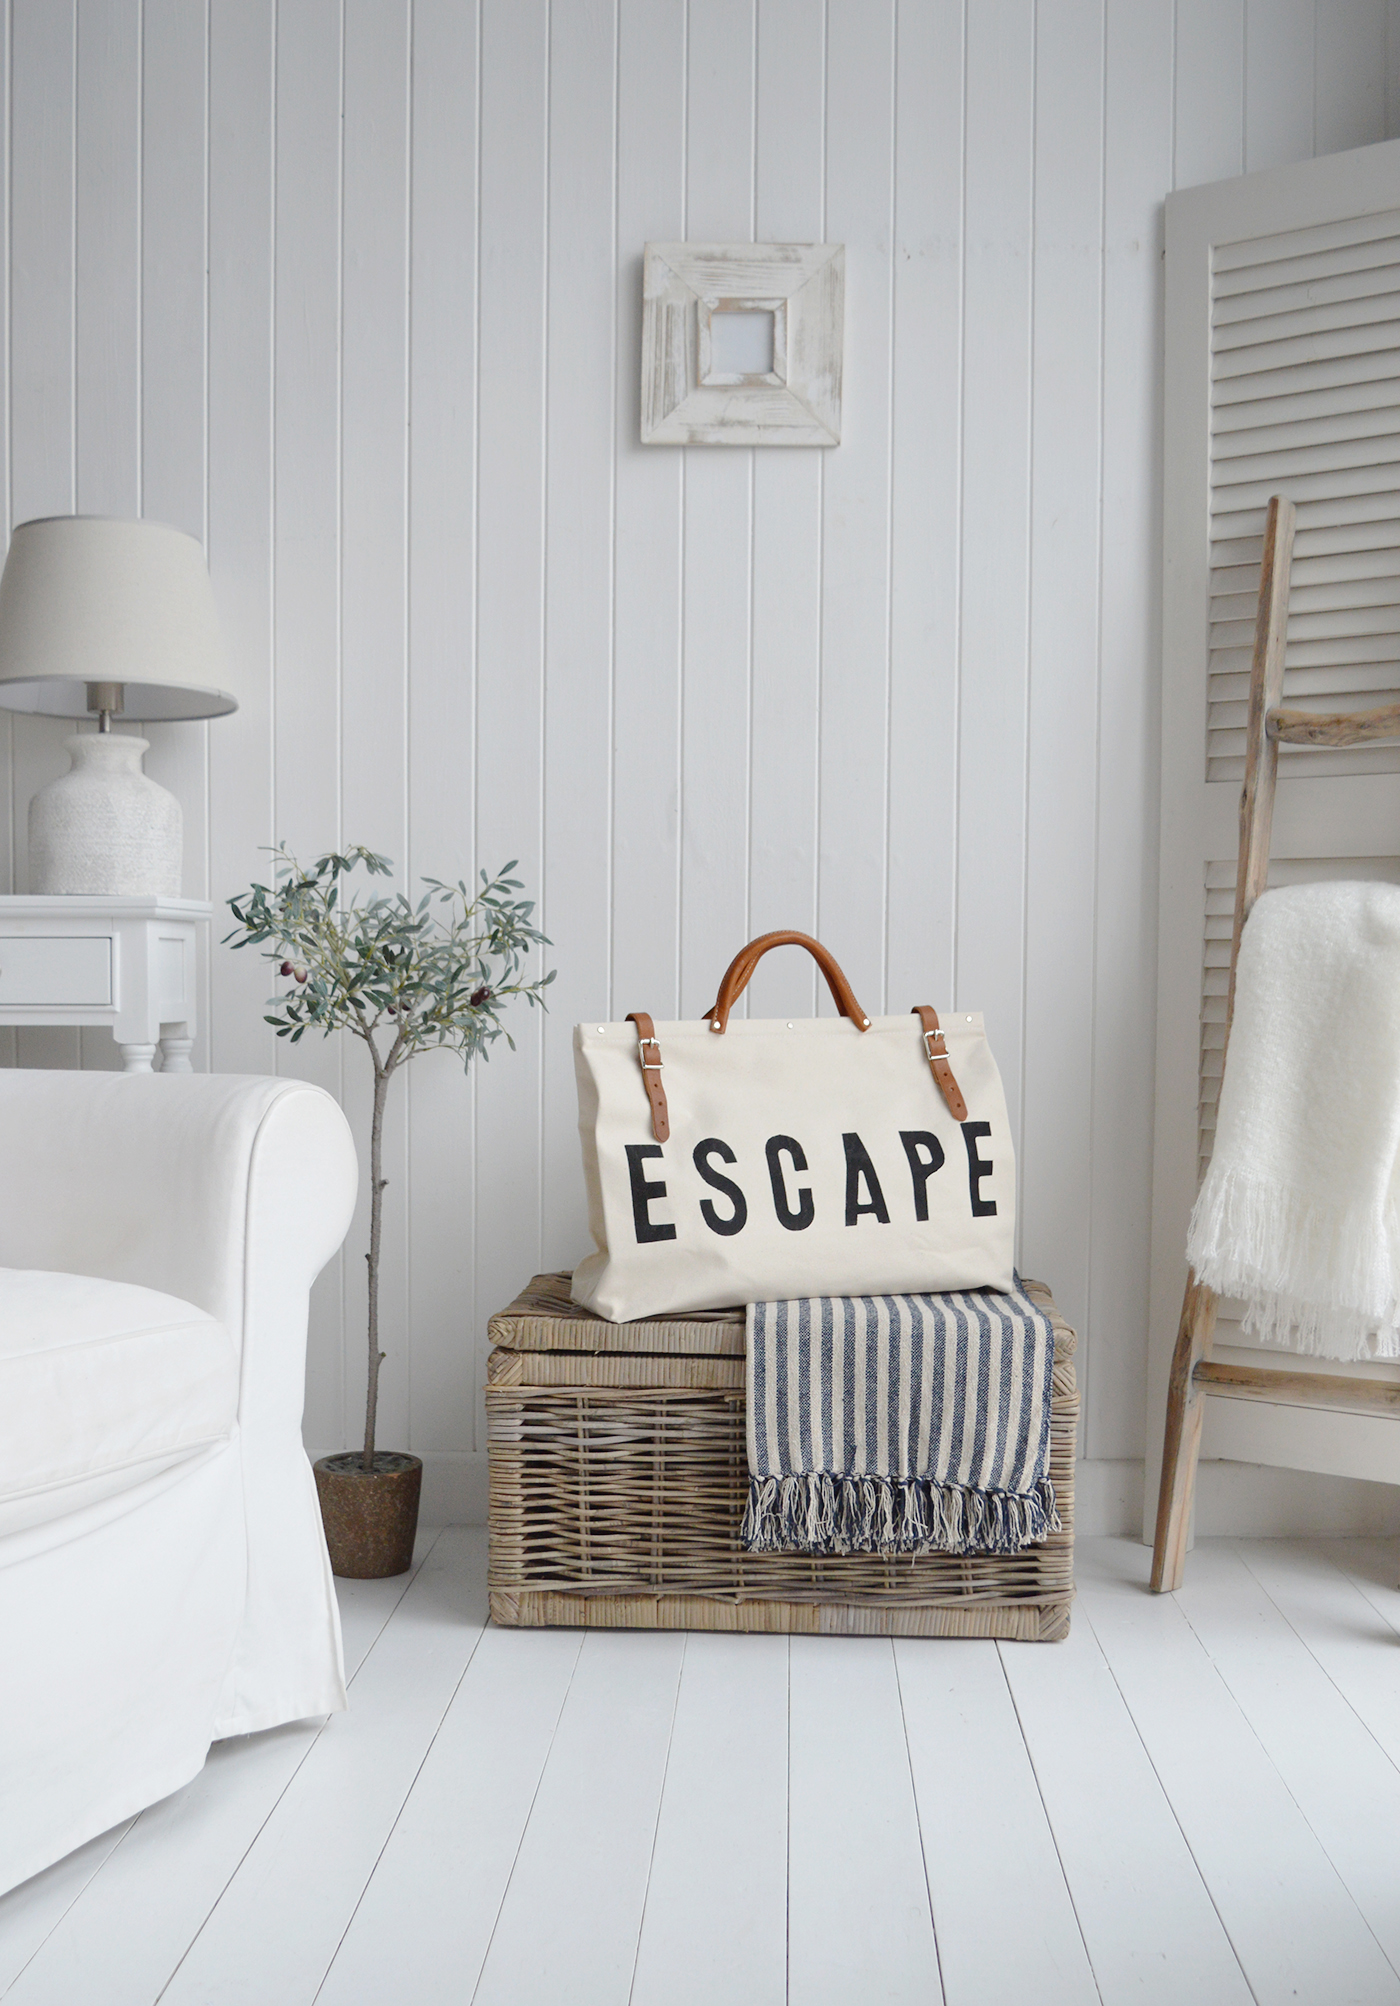 Escape Canvas bag - New England Lifestyle ... perfect for styling Coastal , country and modern farmhouse homes and interiors